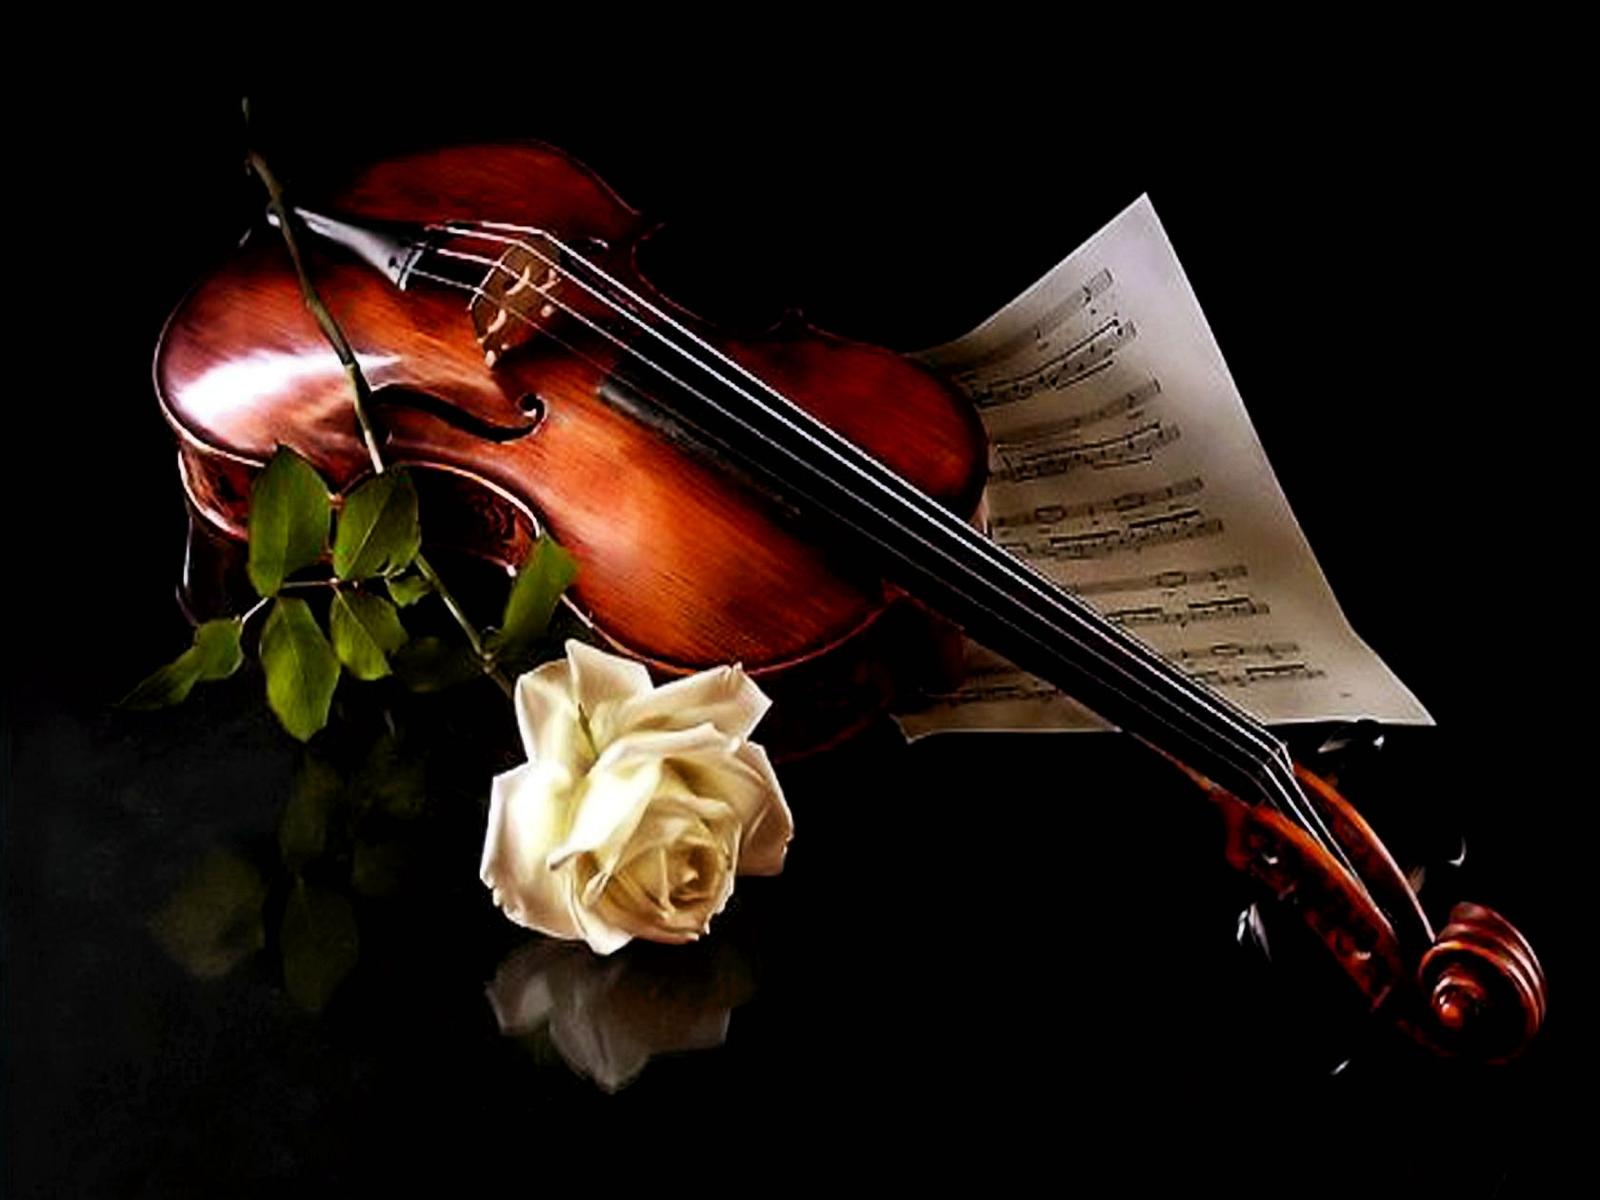 The music of violin and a beautiful white rose